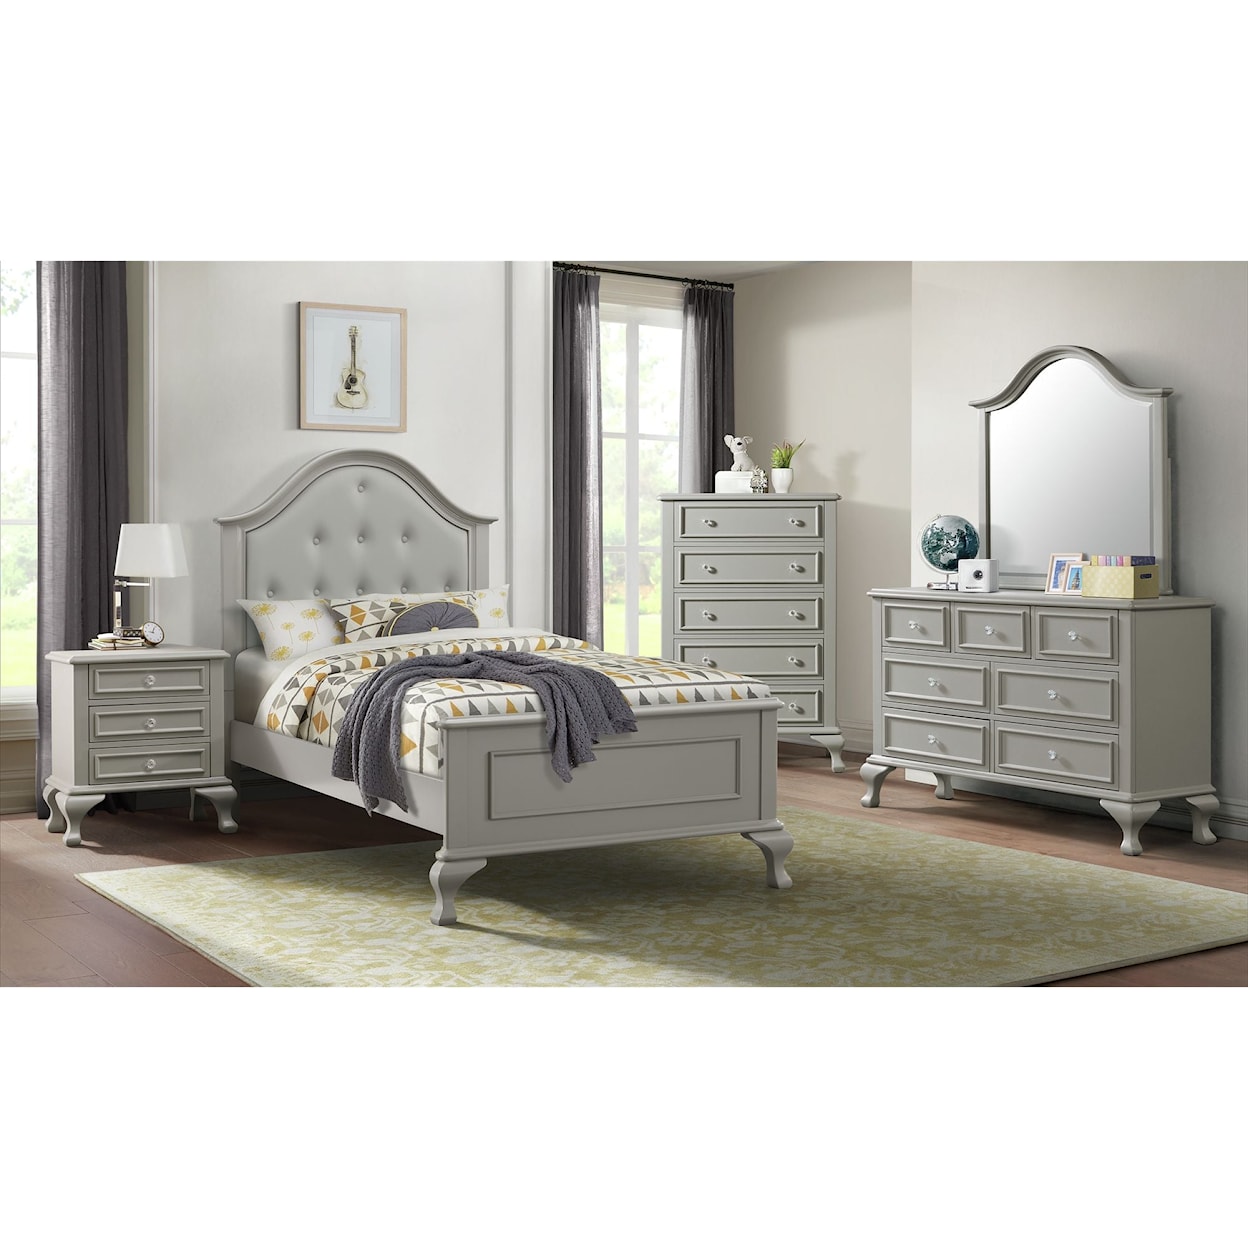 Elements International Jesse Nightstand in Grey (3A packing)